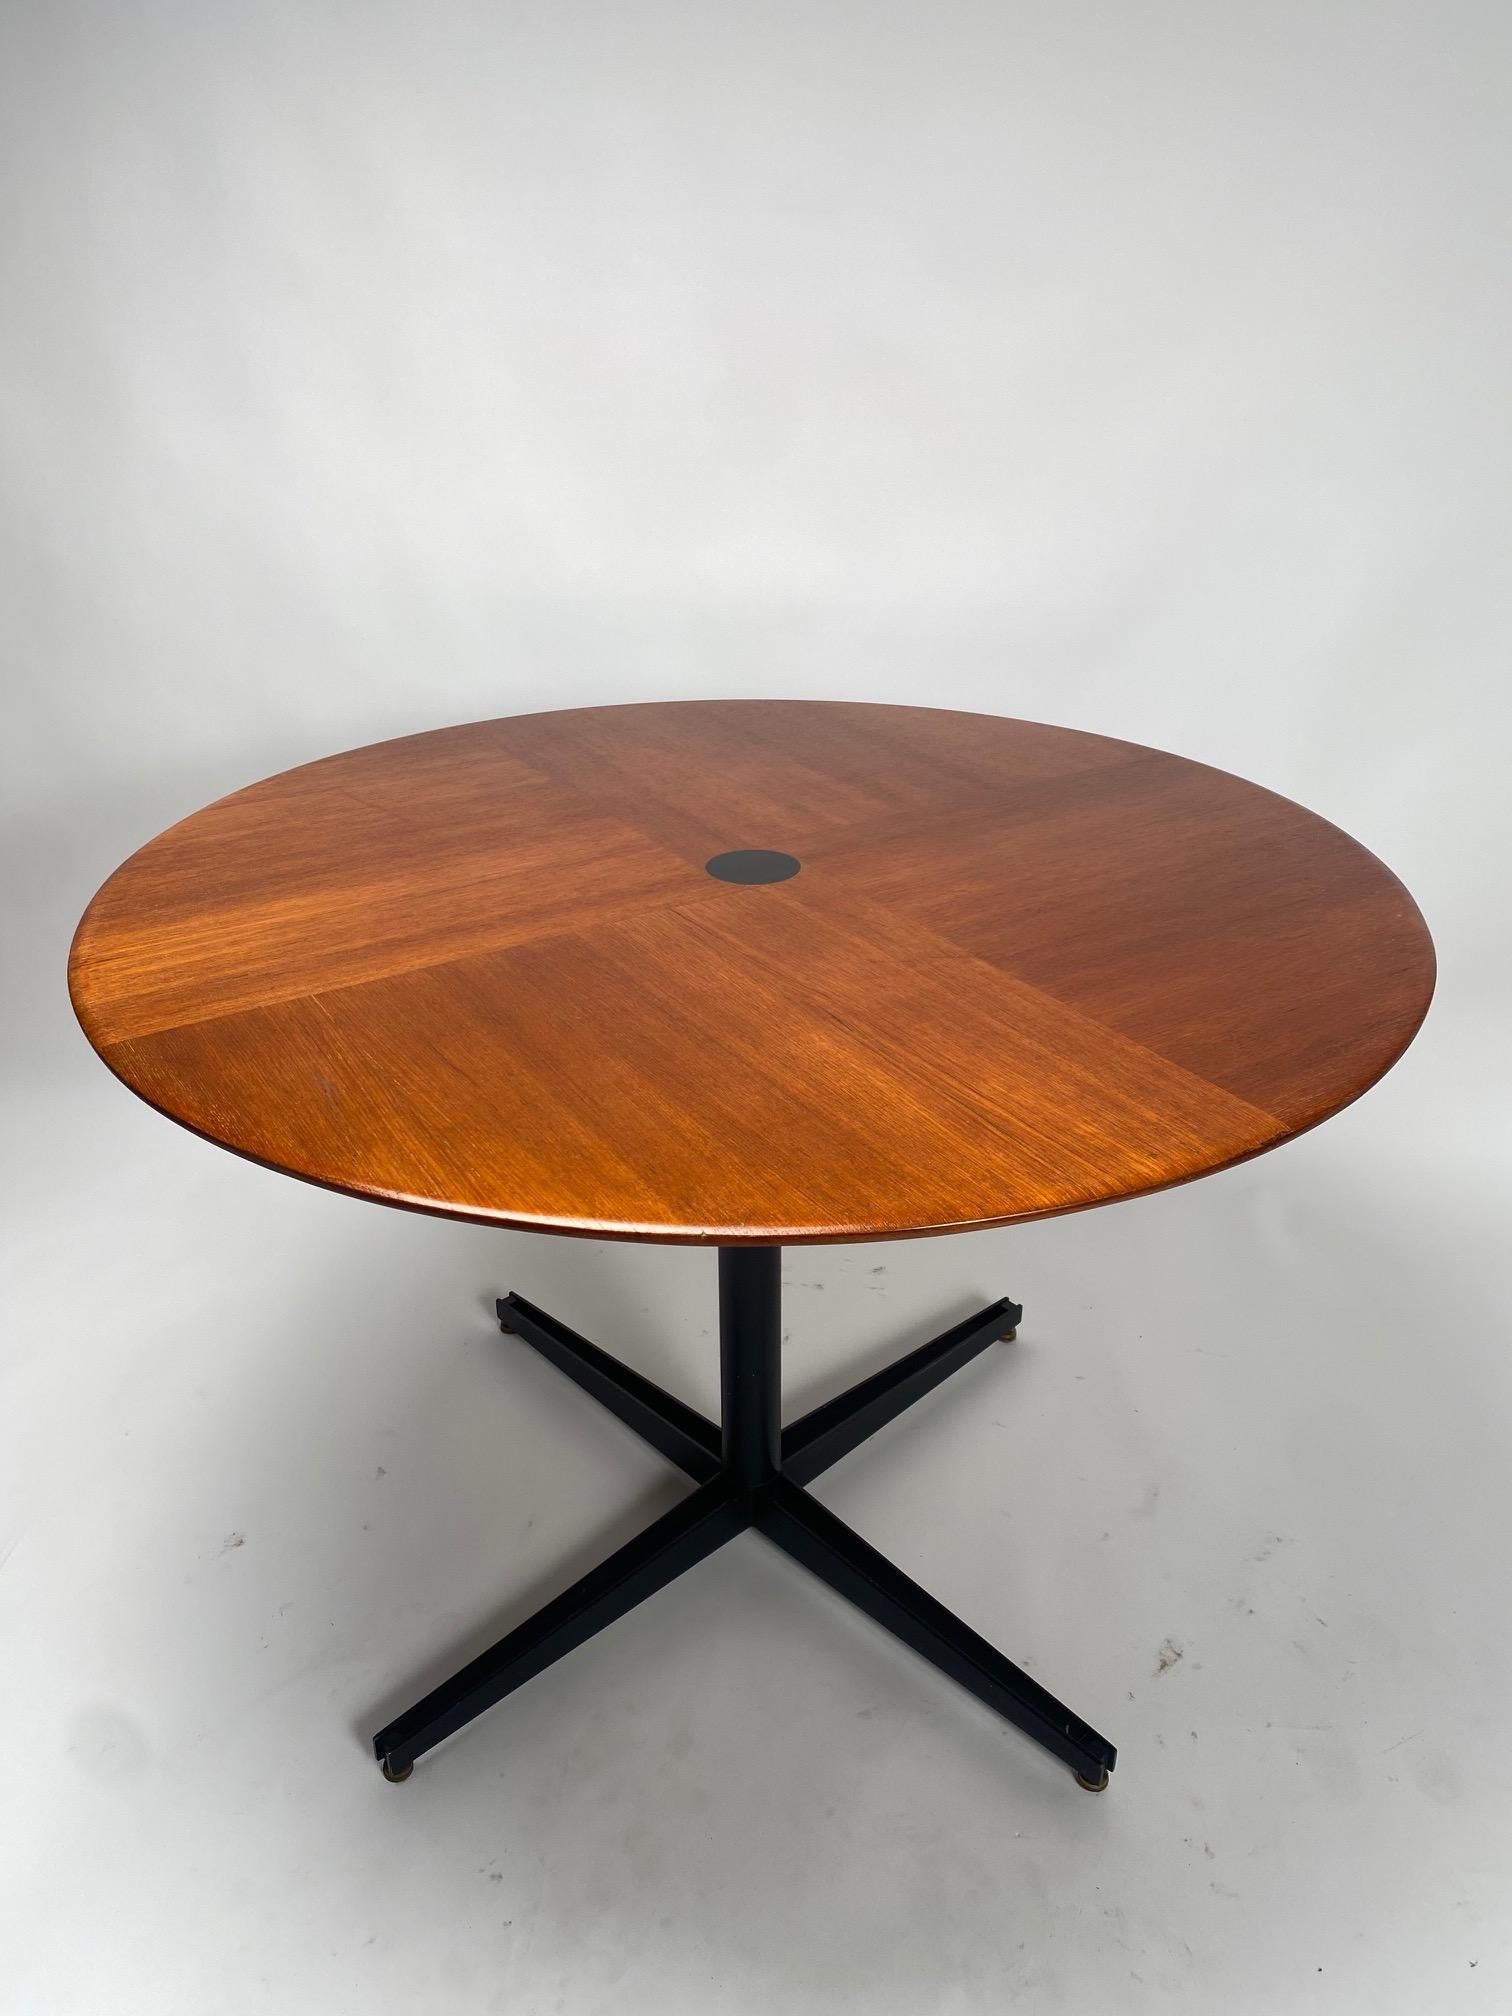 Osvaldo Borsani, Tecno T41 round rosewood table, dining or coffee table, Italy, 1958

It is one of the most elegant and refined tables of 1950s Italian design, created by the famous architect and designer Osvaldo Borsani.
In the center of the top, a